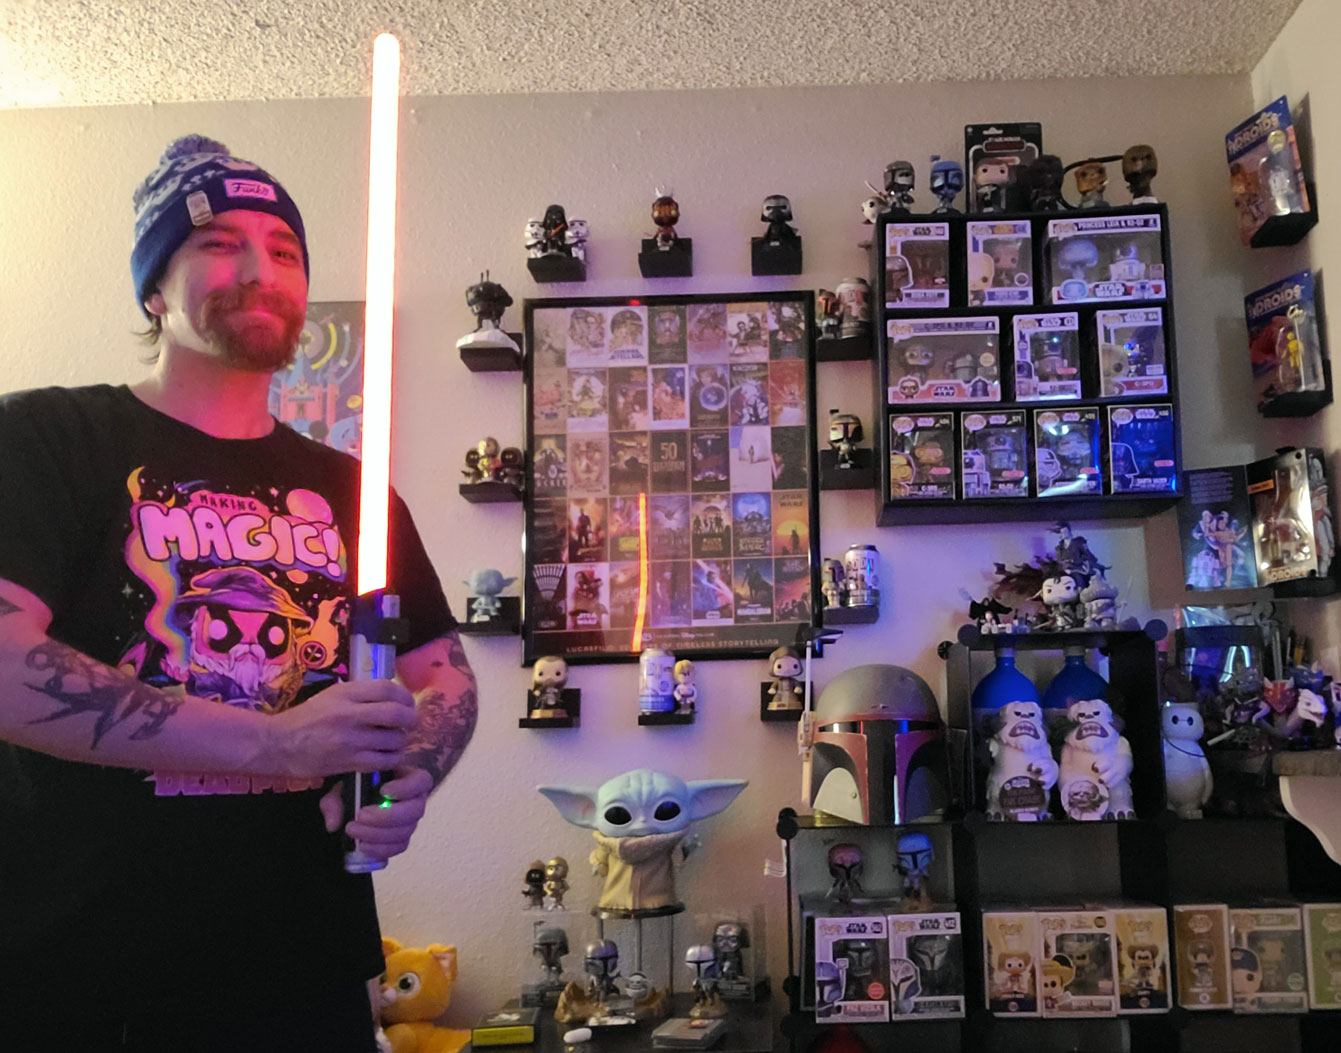 Garret brandishes a lightsaber in front of his Star Wars collection